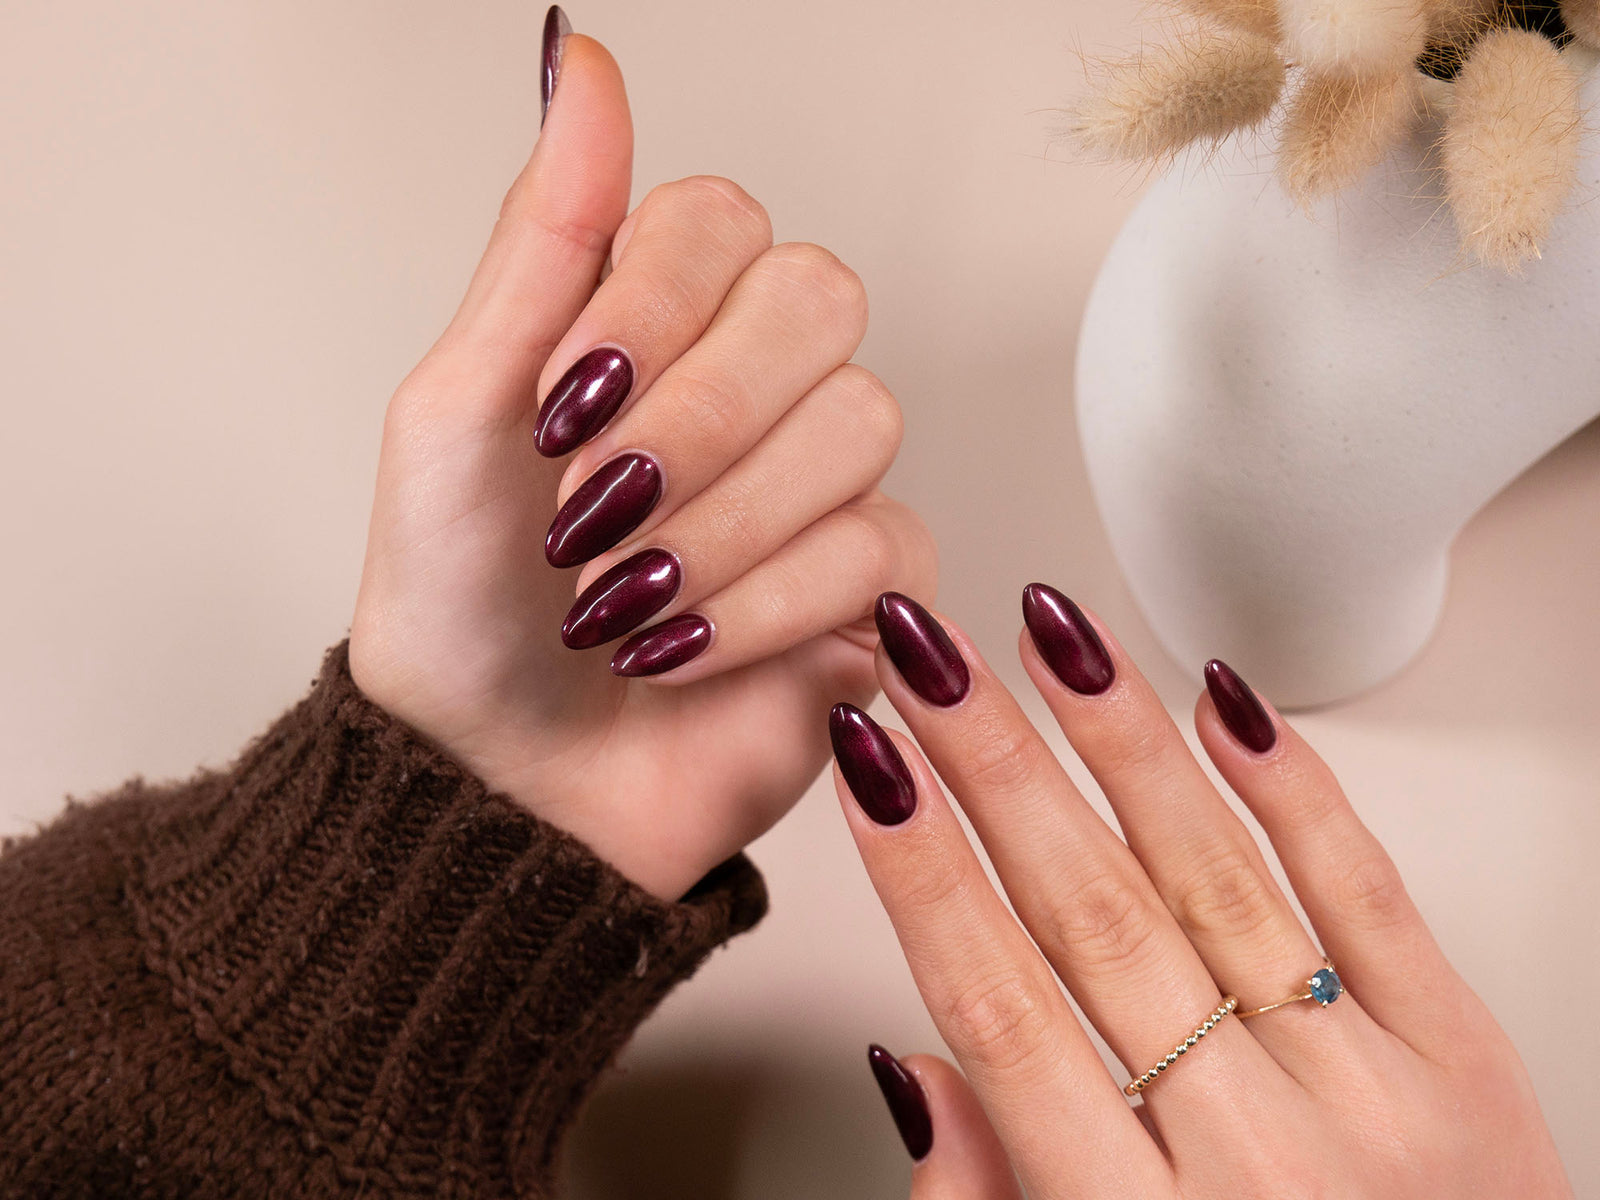 50 Gorgeous Winter Nail Ideas for the Holiday Season - Self-Care by Sum